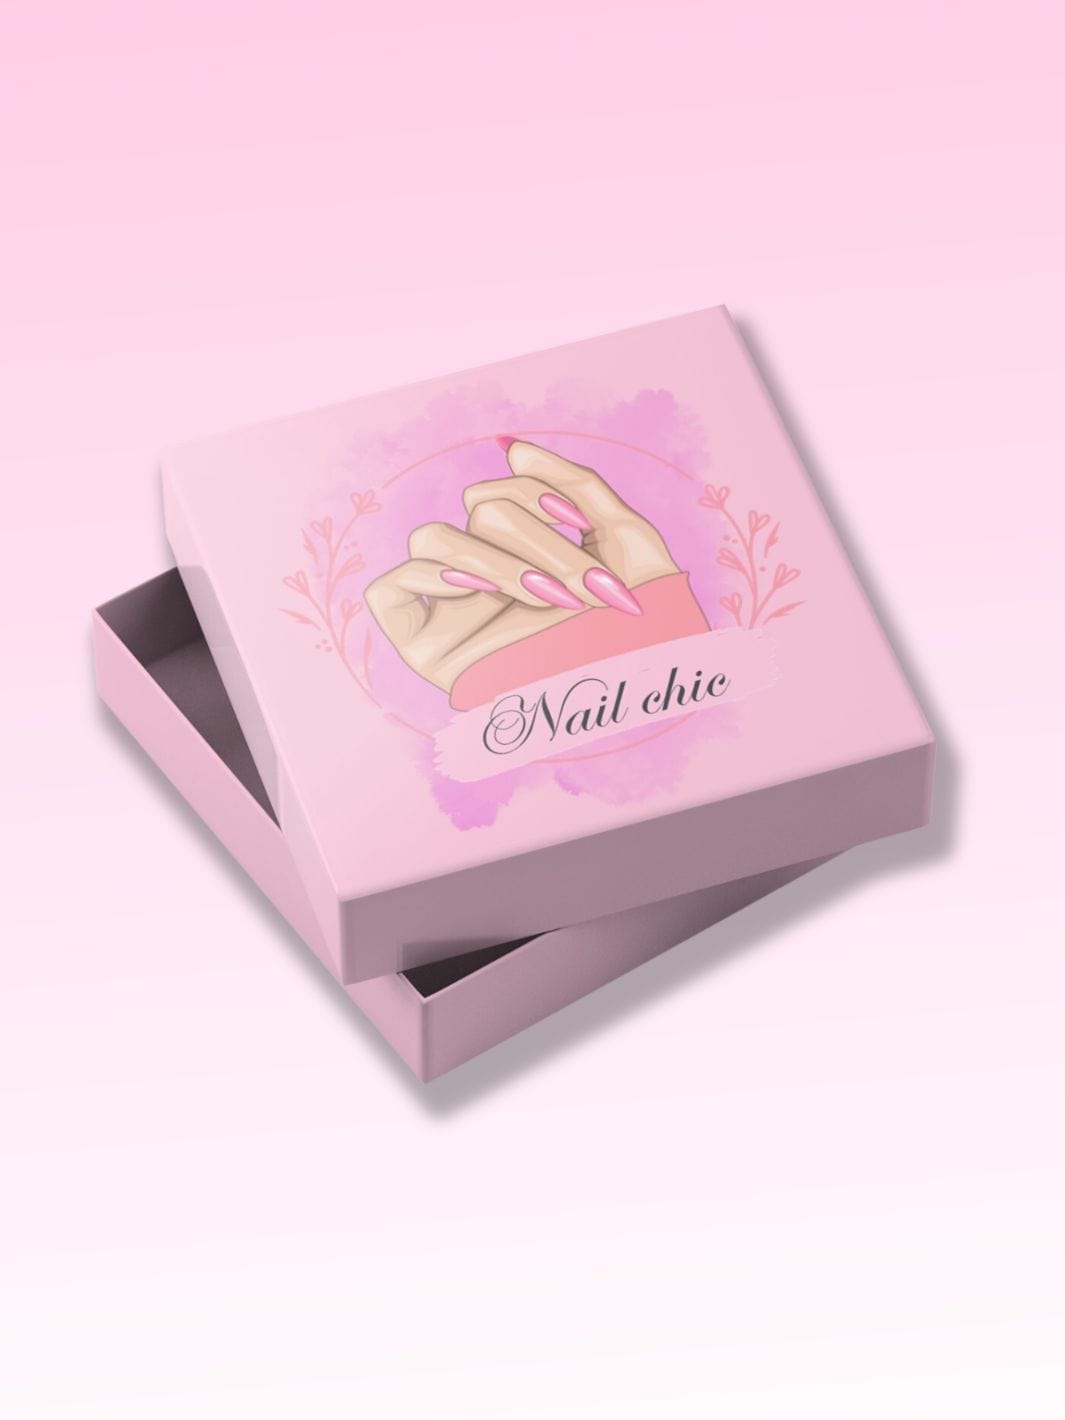 Kit gel faux ongles Nail Chic